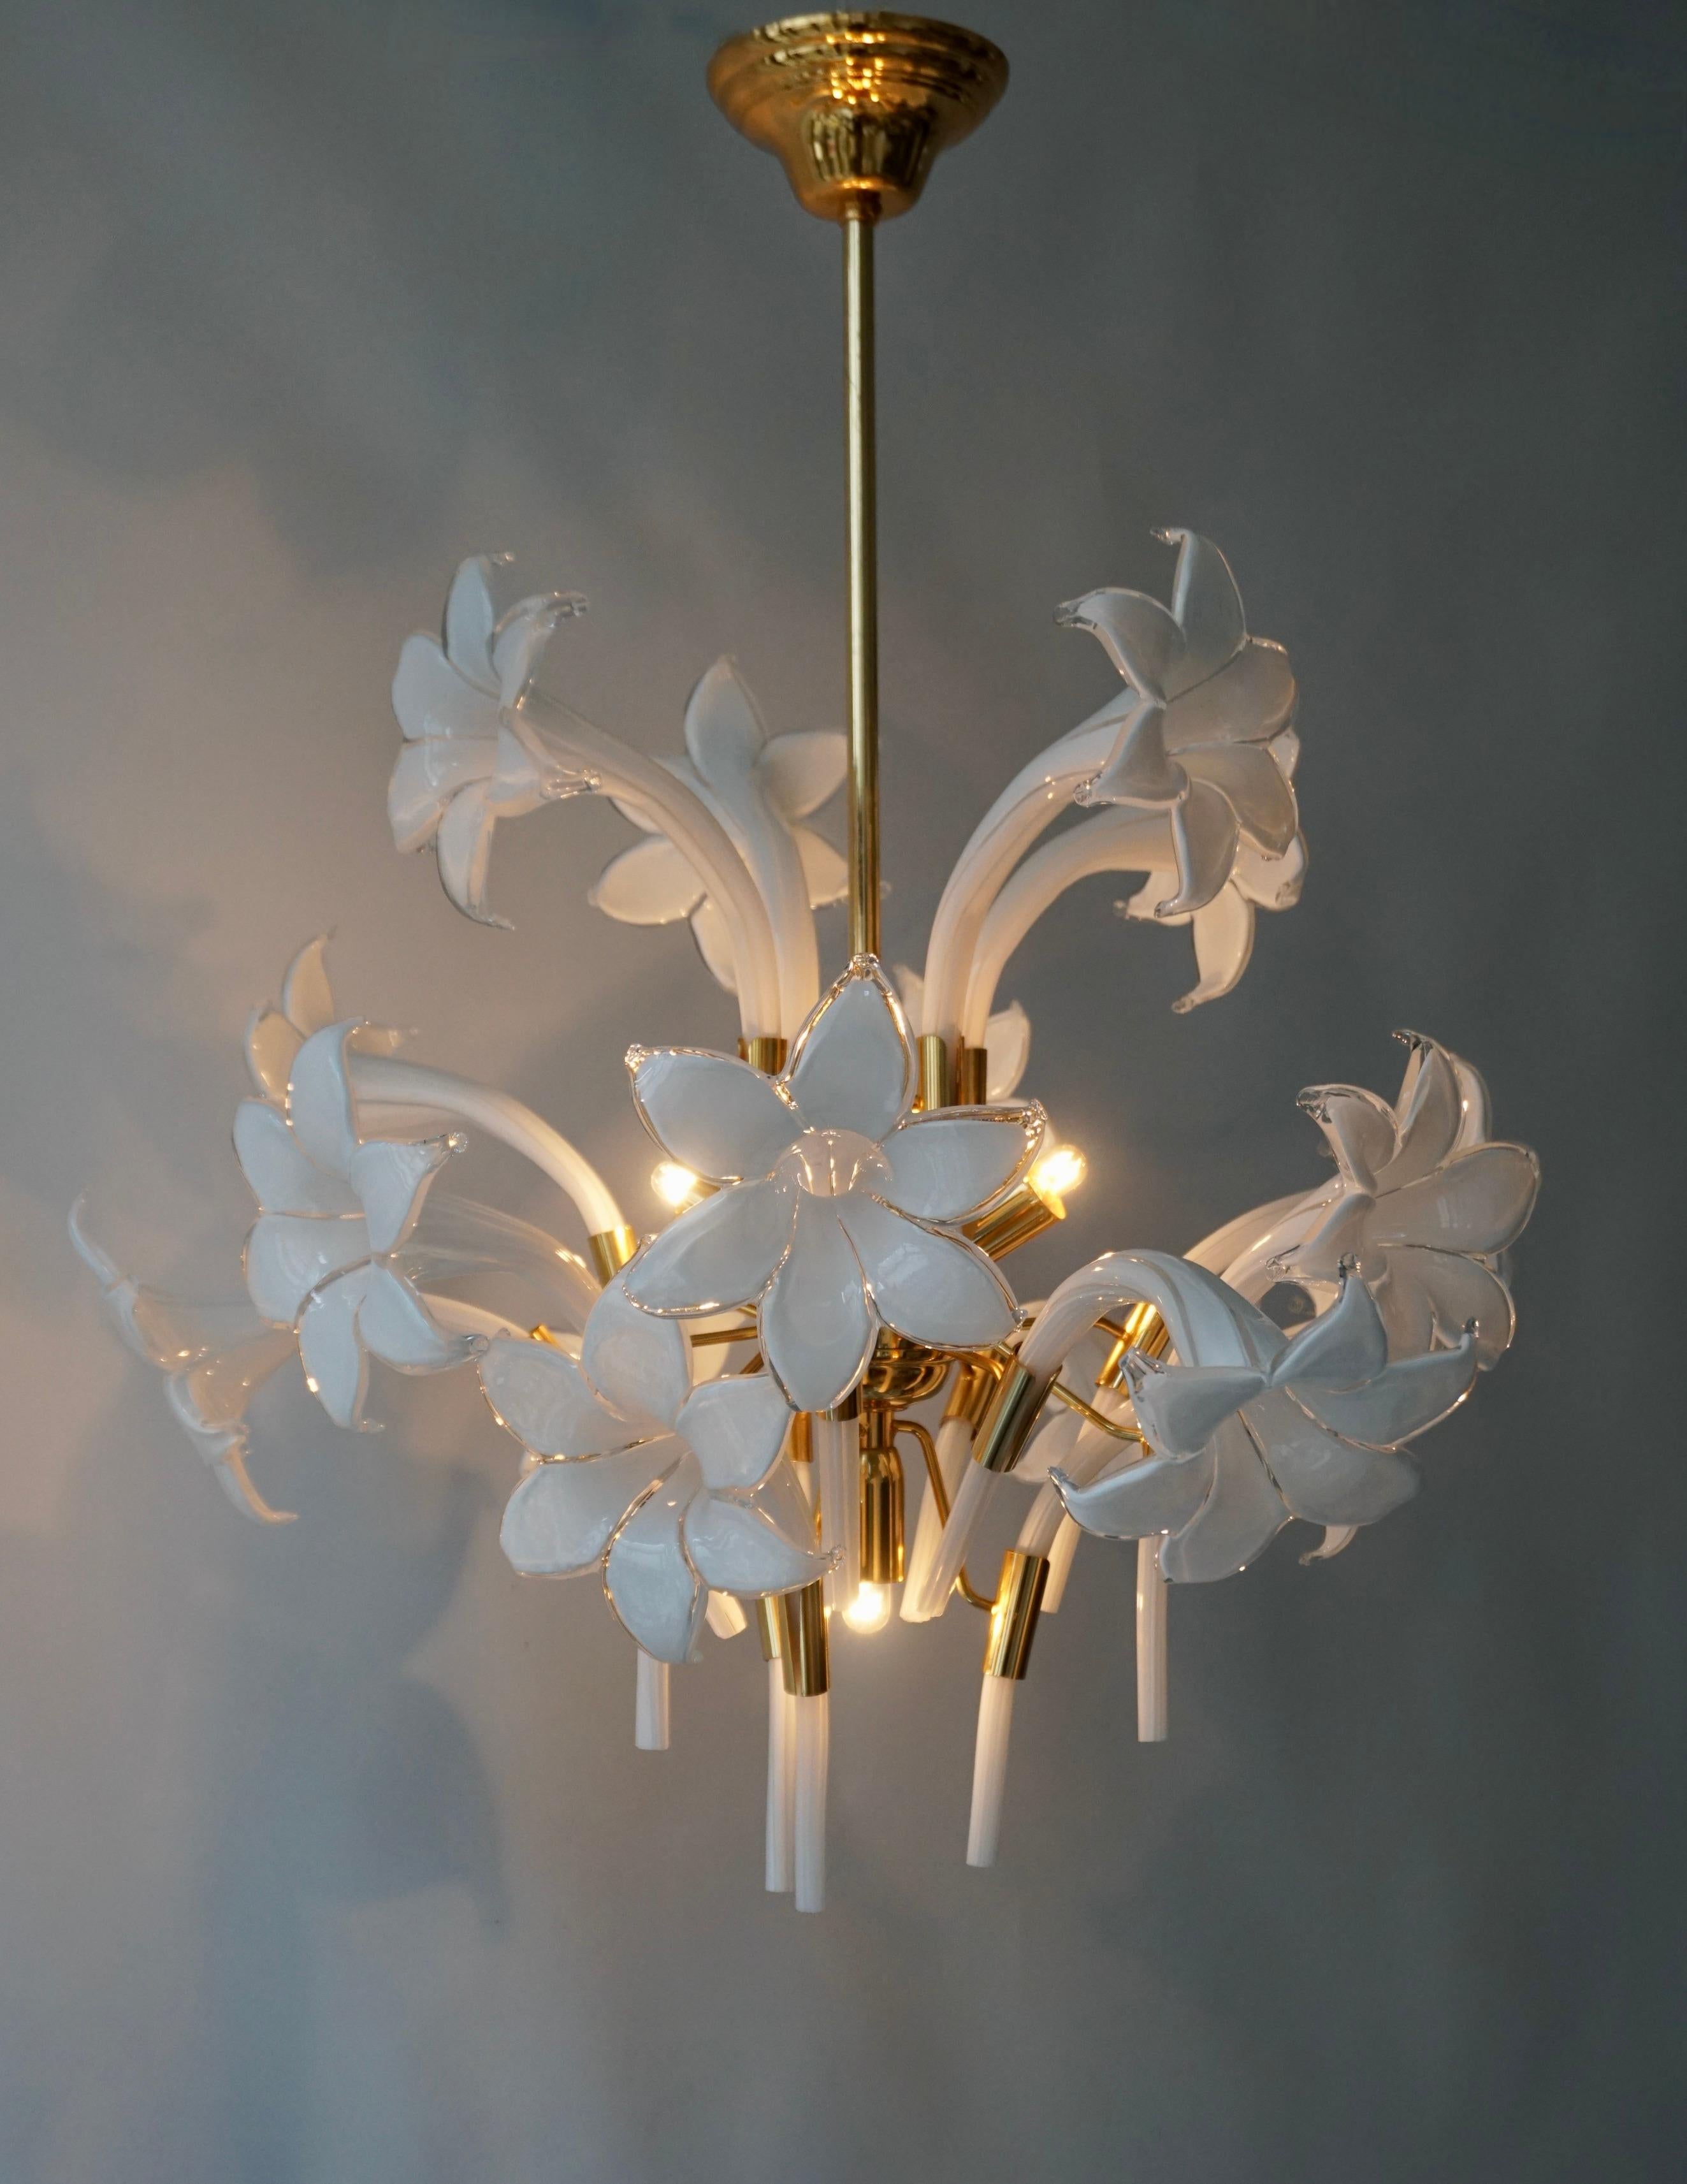 Hollywood Regency Mid-Century Modern Chandelier Designed by Franco Luce with Murano Glass Flowers For Sale